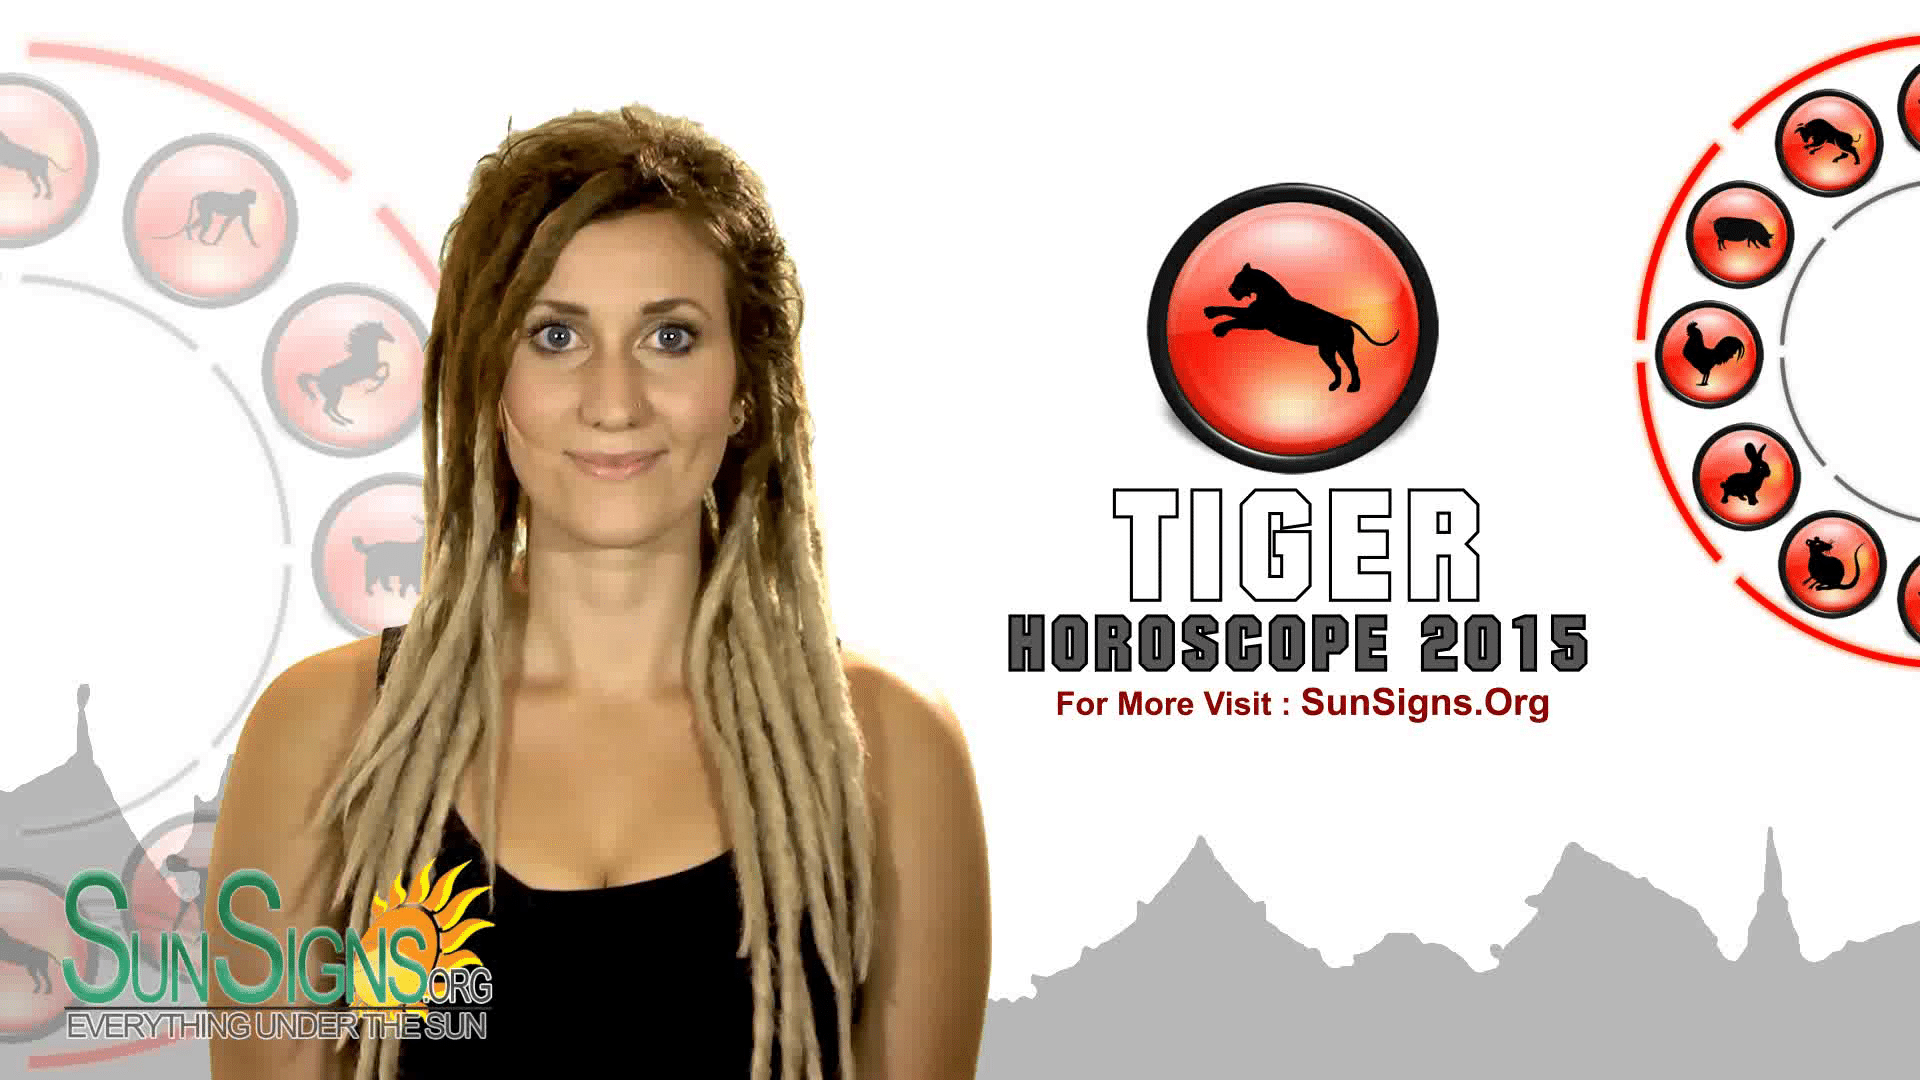 Tiger 2015 Horoscope | SunSigns.Org1920 x 1080